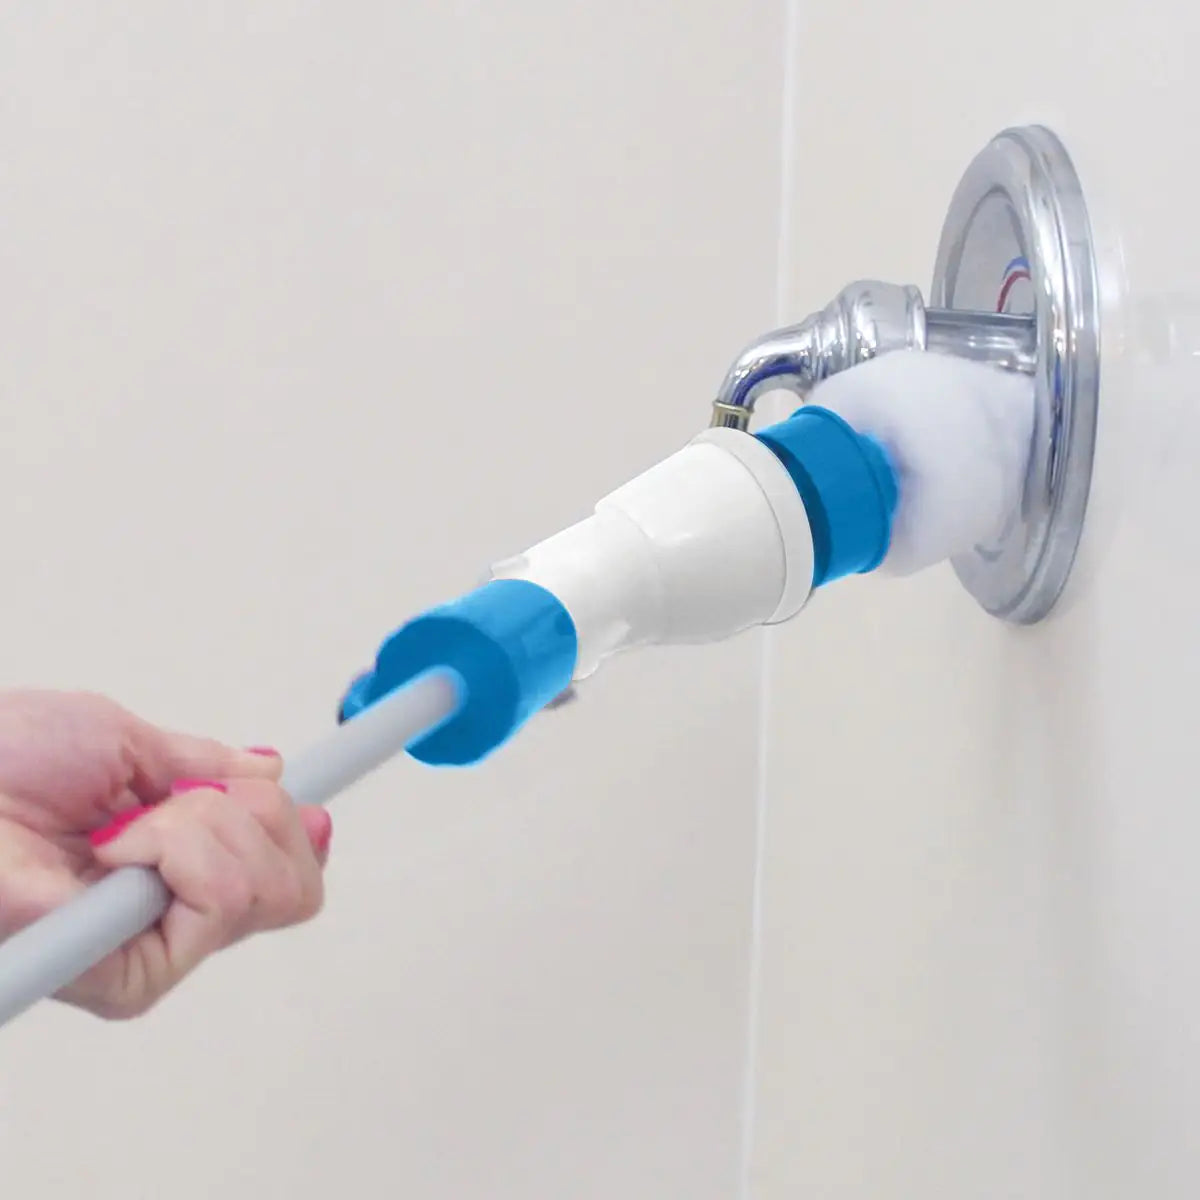 JML Hurricane Spin Scrubber The Reach Anywhere Cordless Electric Scrubber - White &amp; Blue | V0827 from JML - DID Electrical